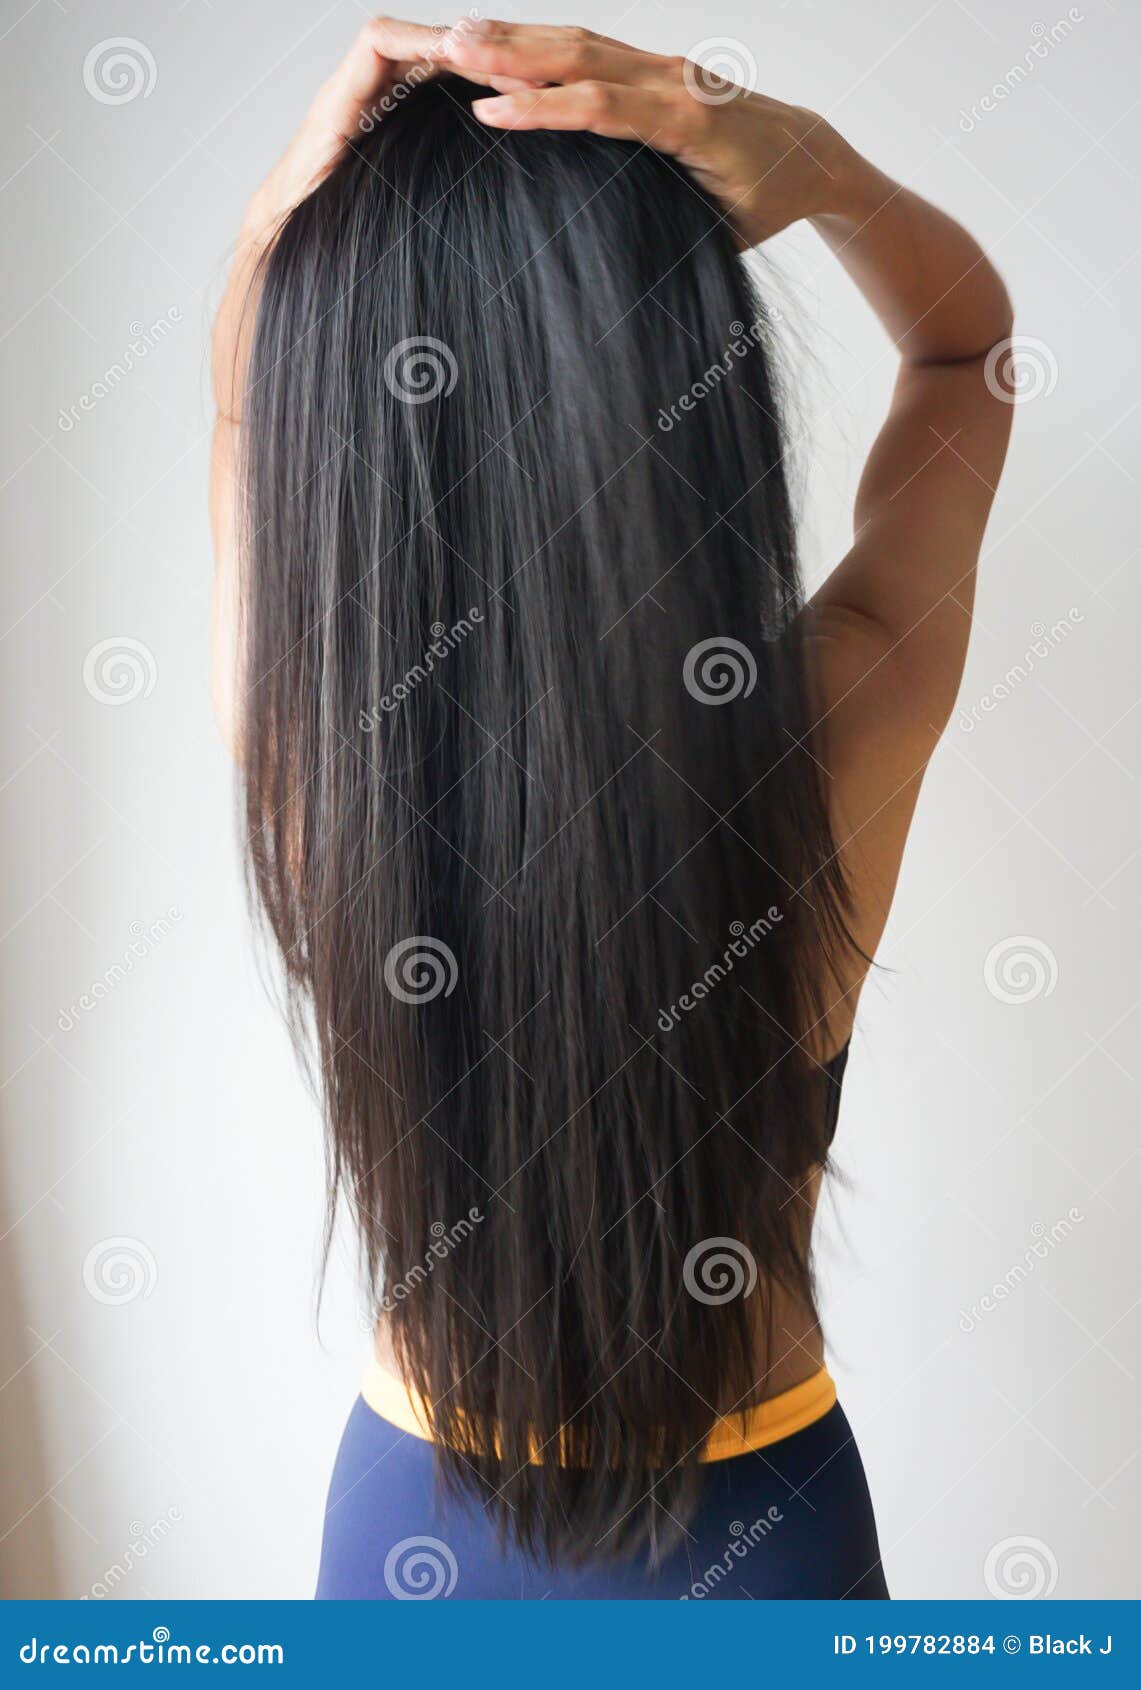 2 730 Long Black Hair Back View Photos Free Royalty Free Stock Photos From Dreamstime